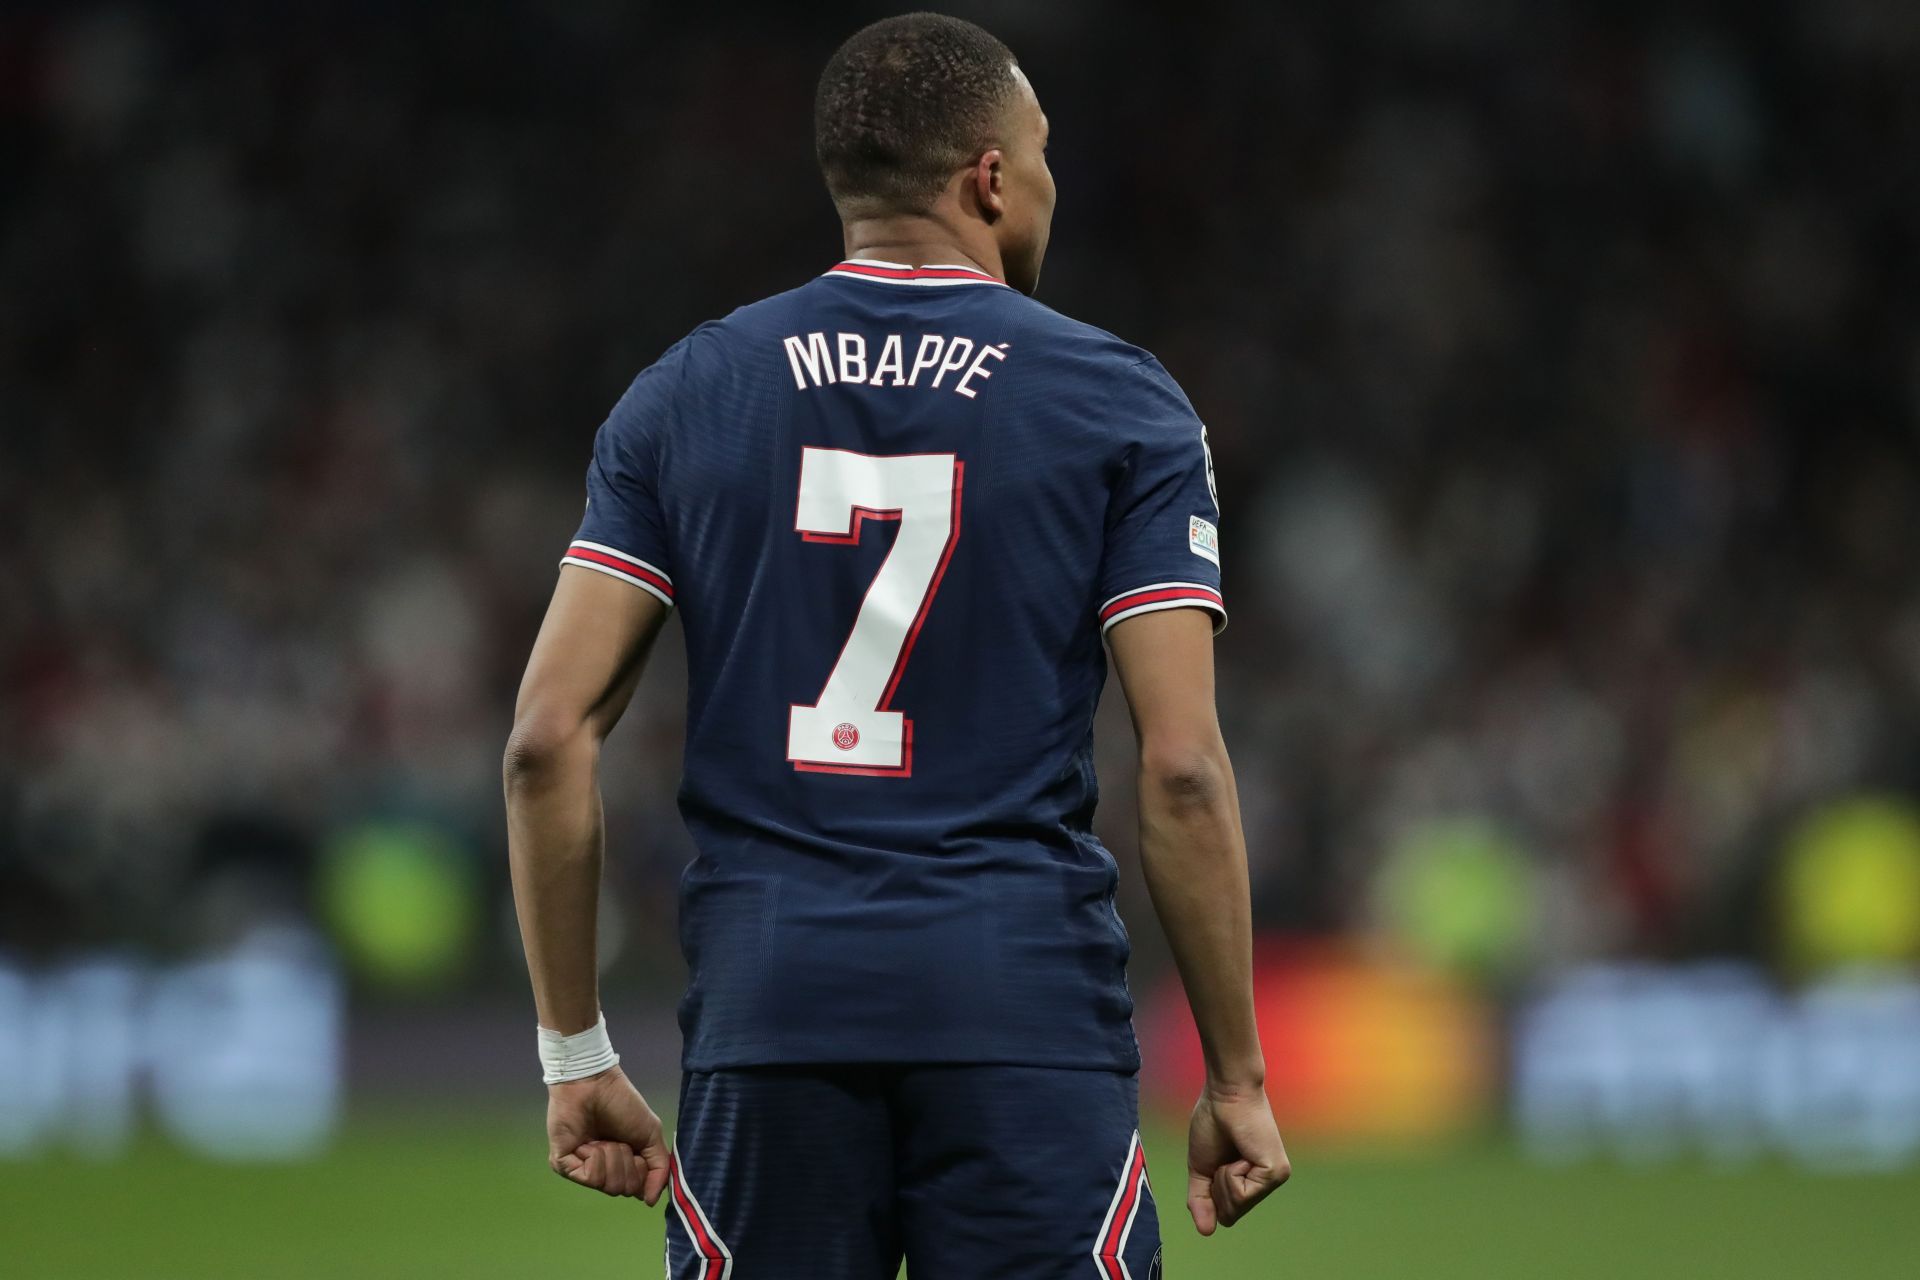 Mbappe is among the most prominent French footballers in the world